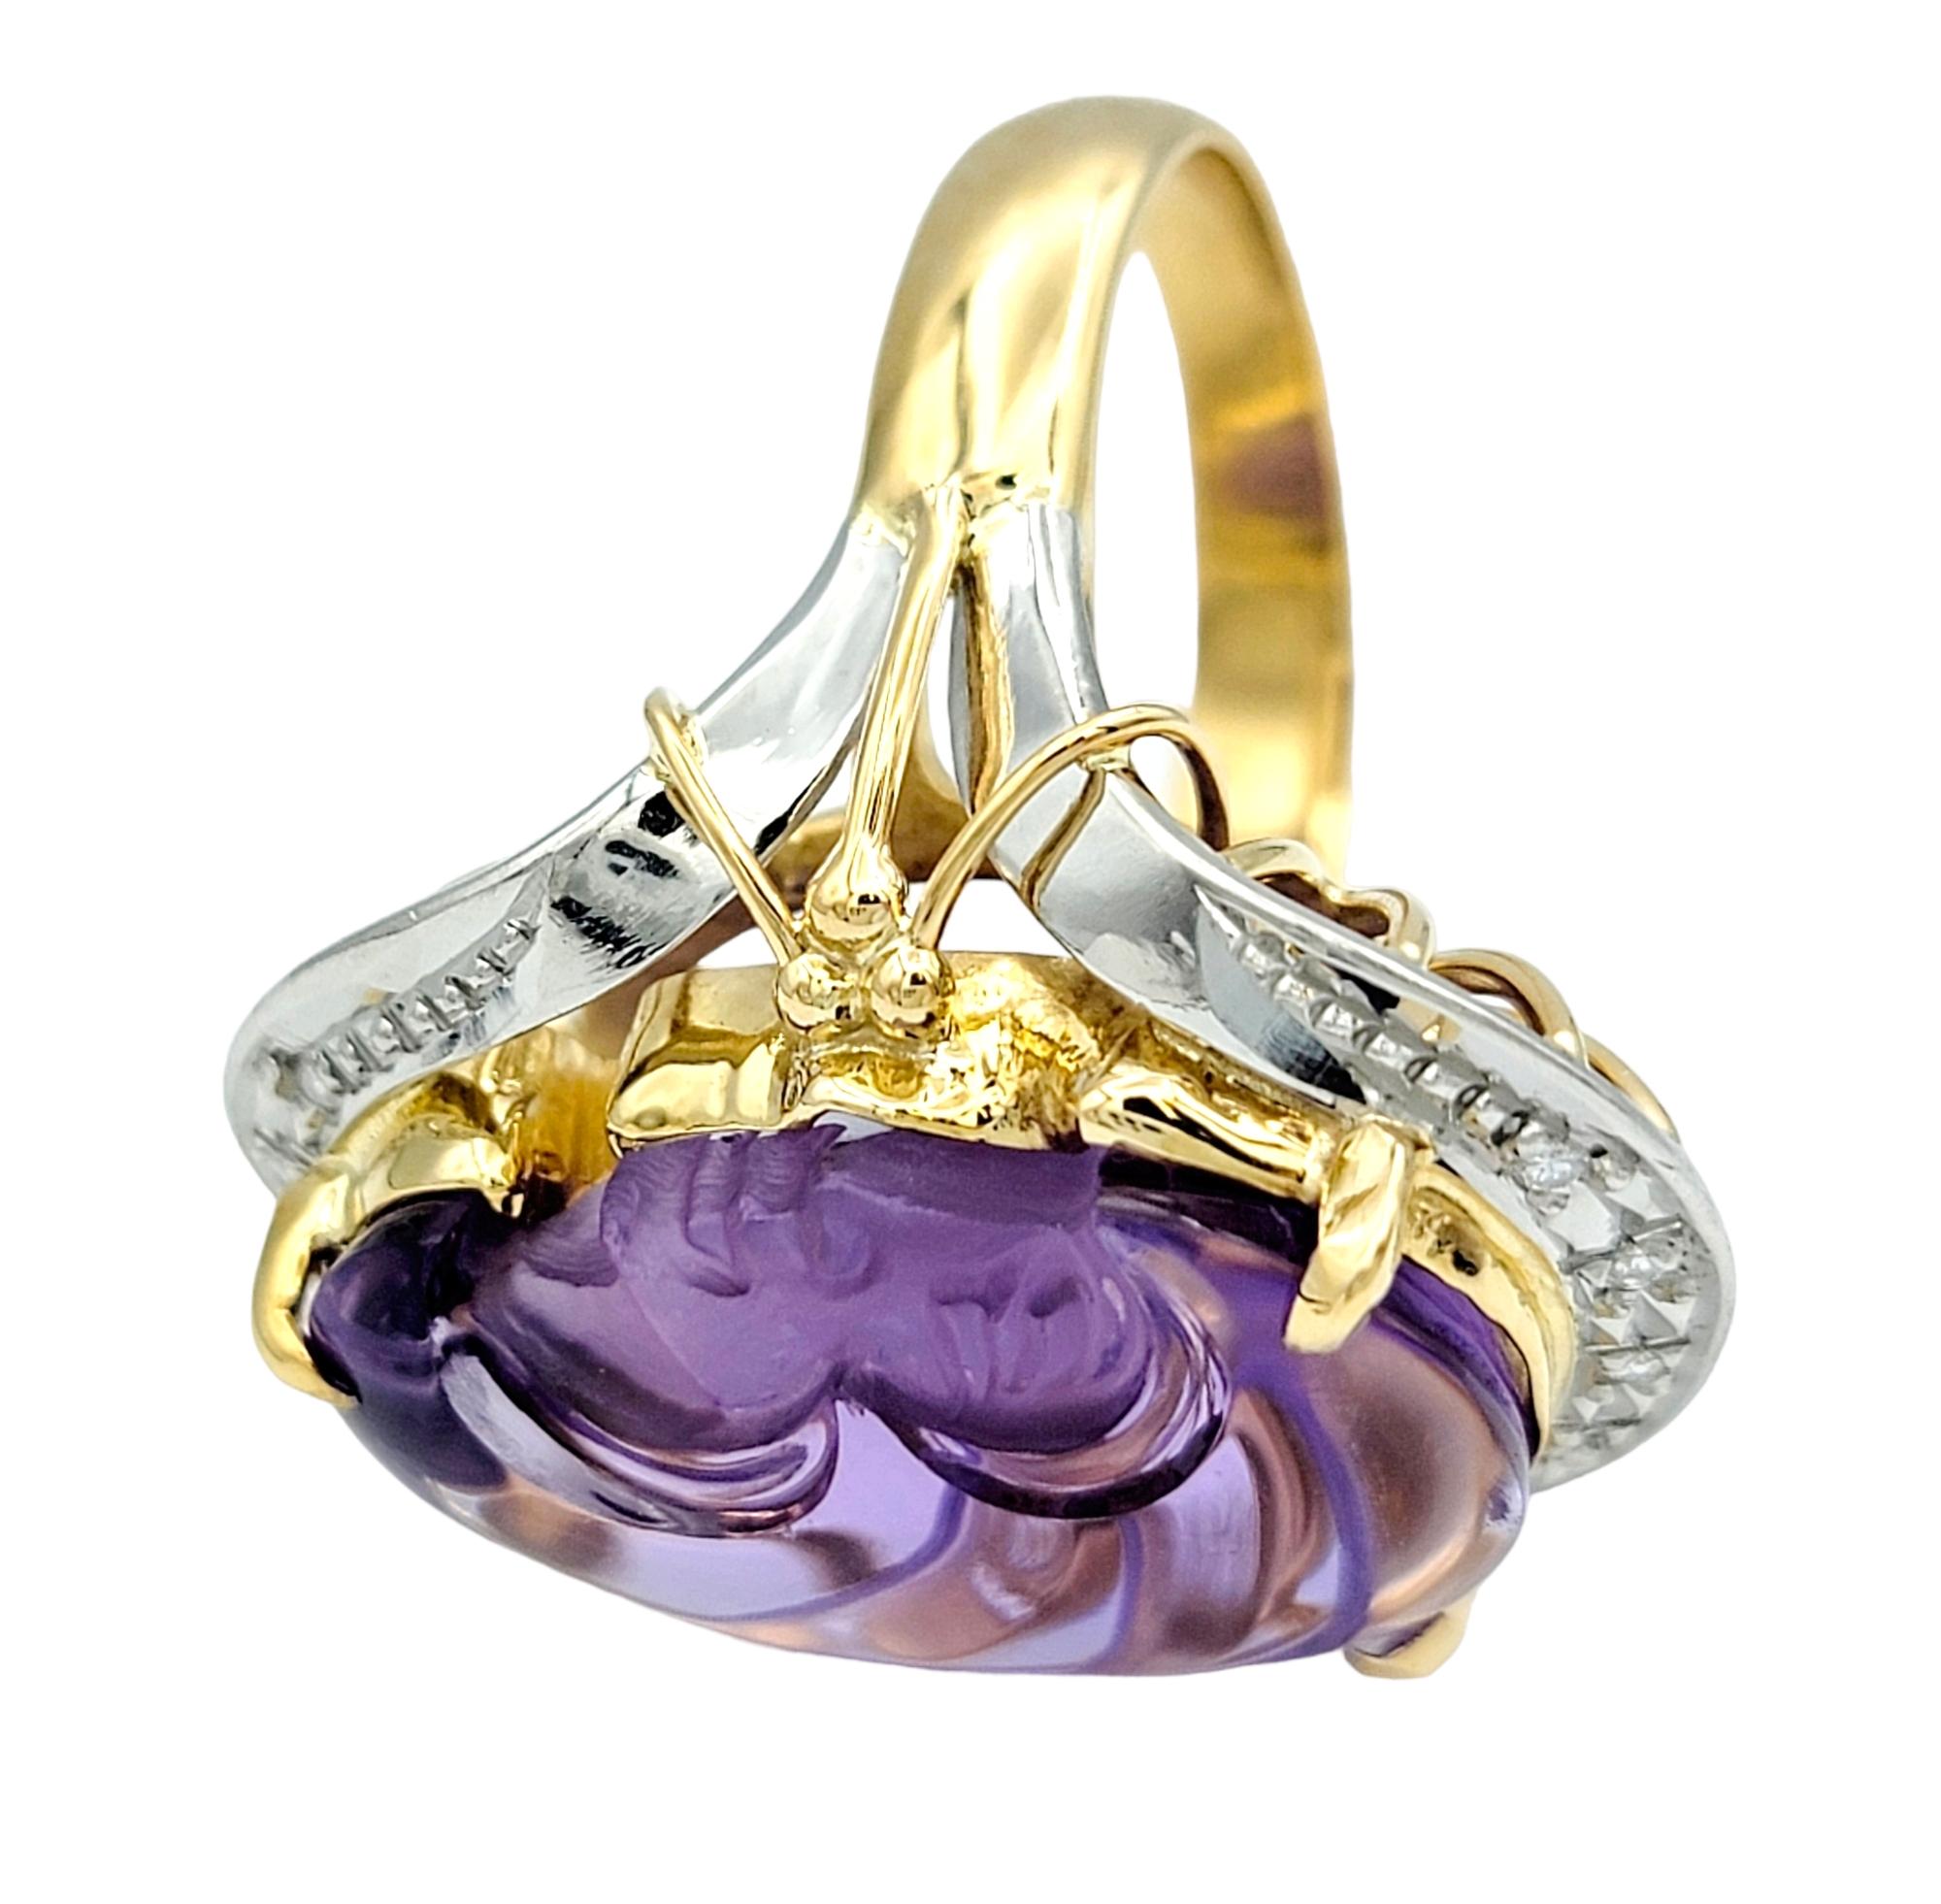 Carved Amethyst Profile and Diamond Ring in 18 Karat Yellow Gold and Platinum In Good Condition For Sale In Scottsdale, AZ